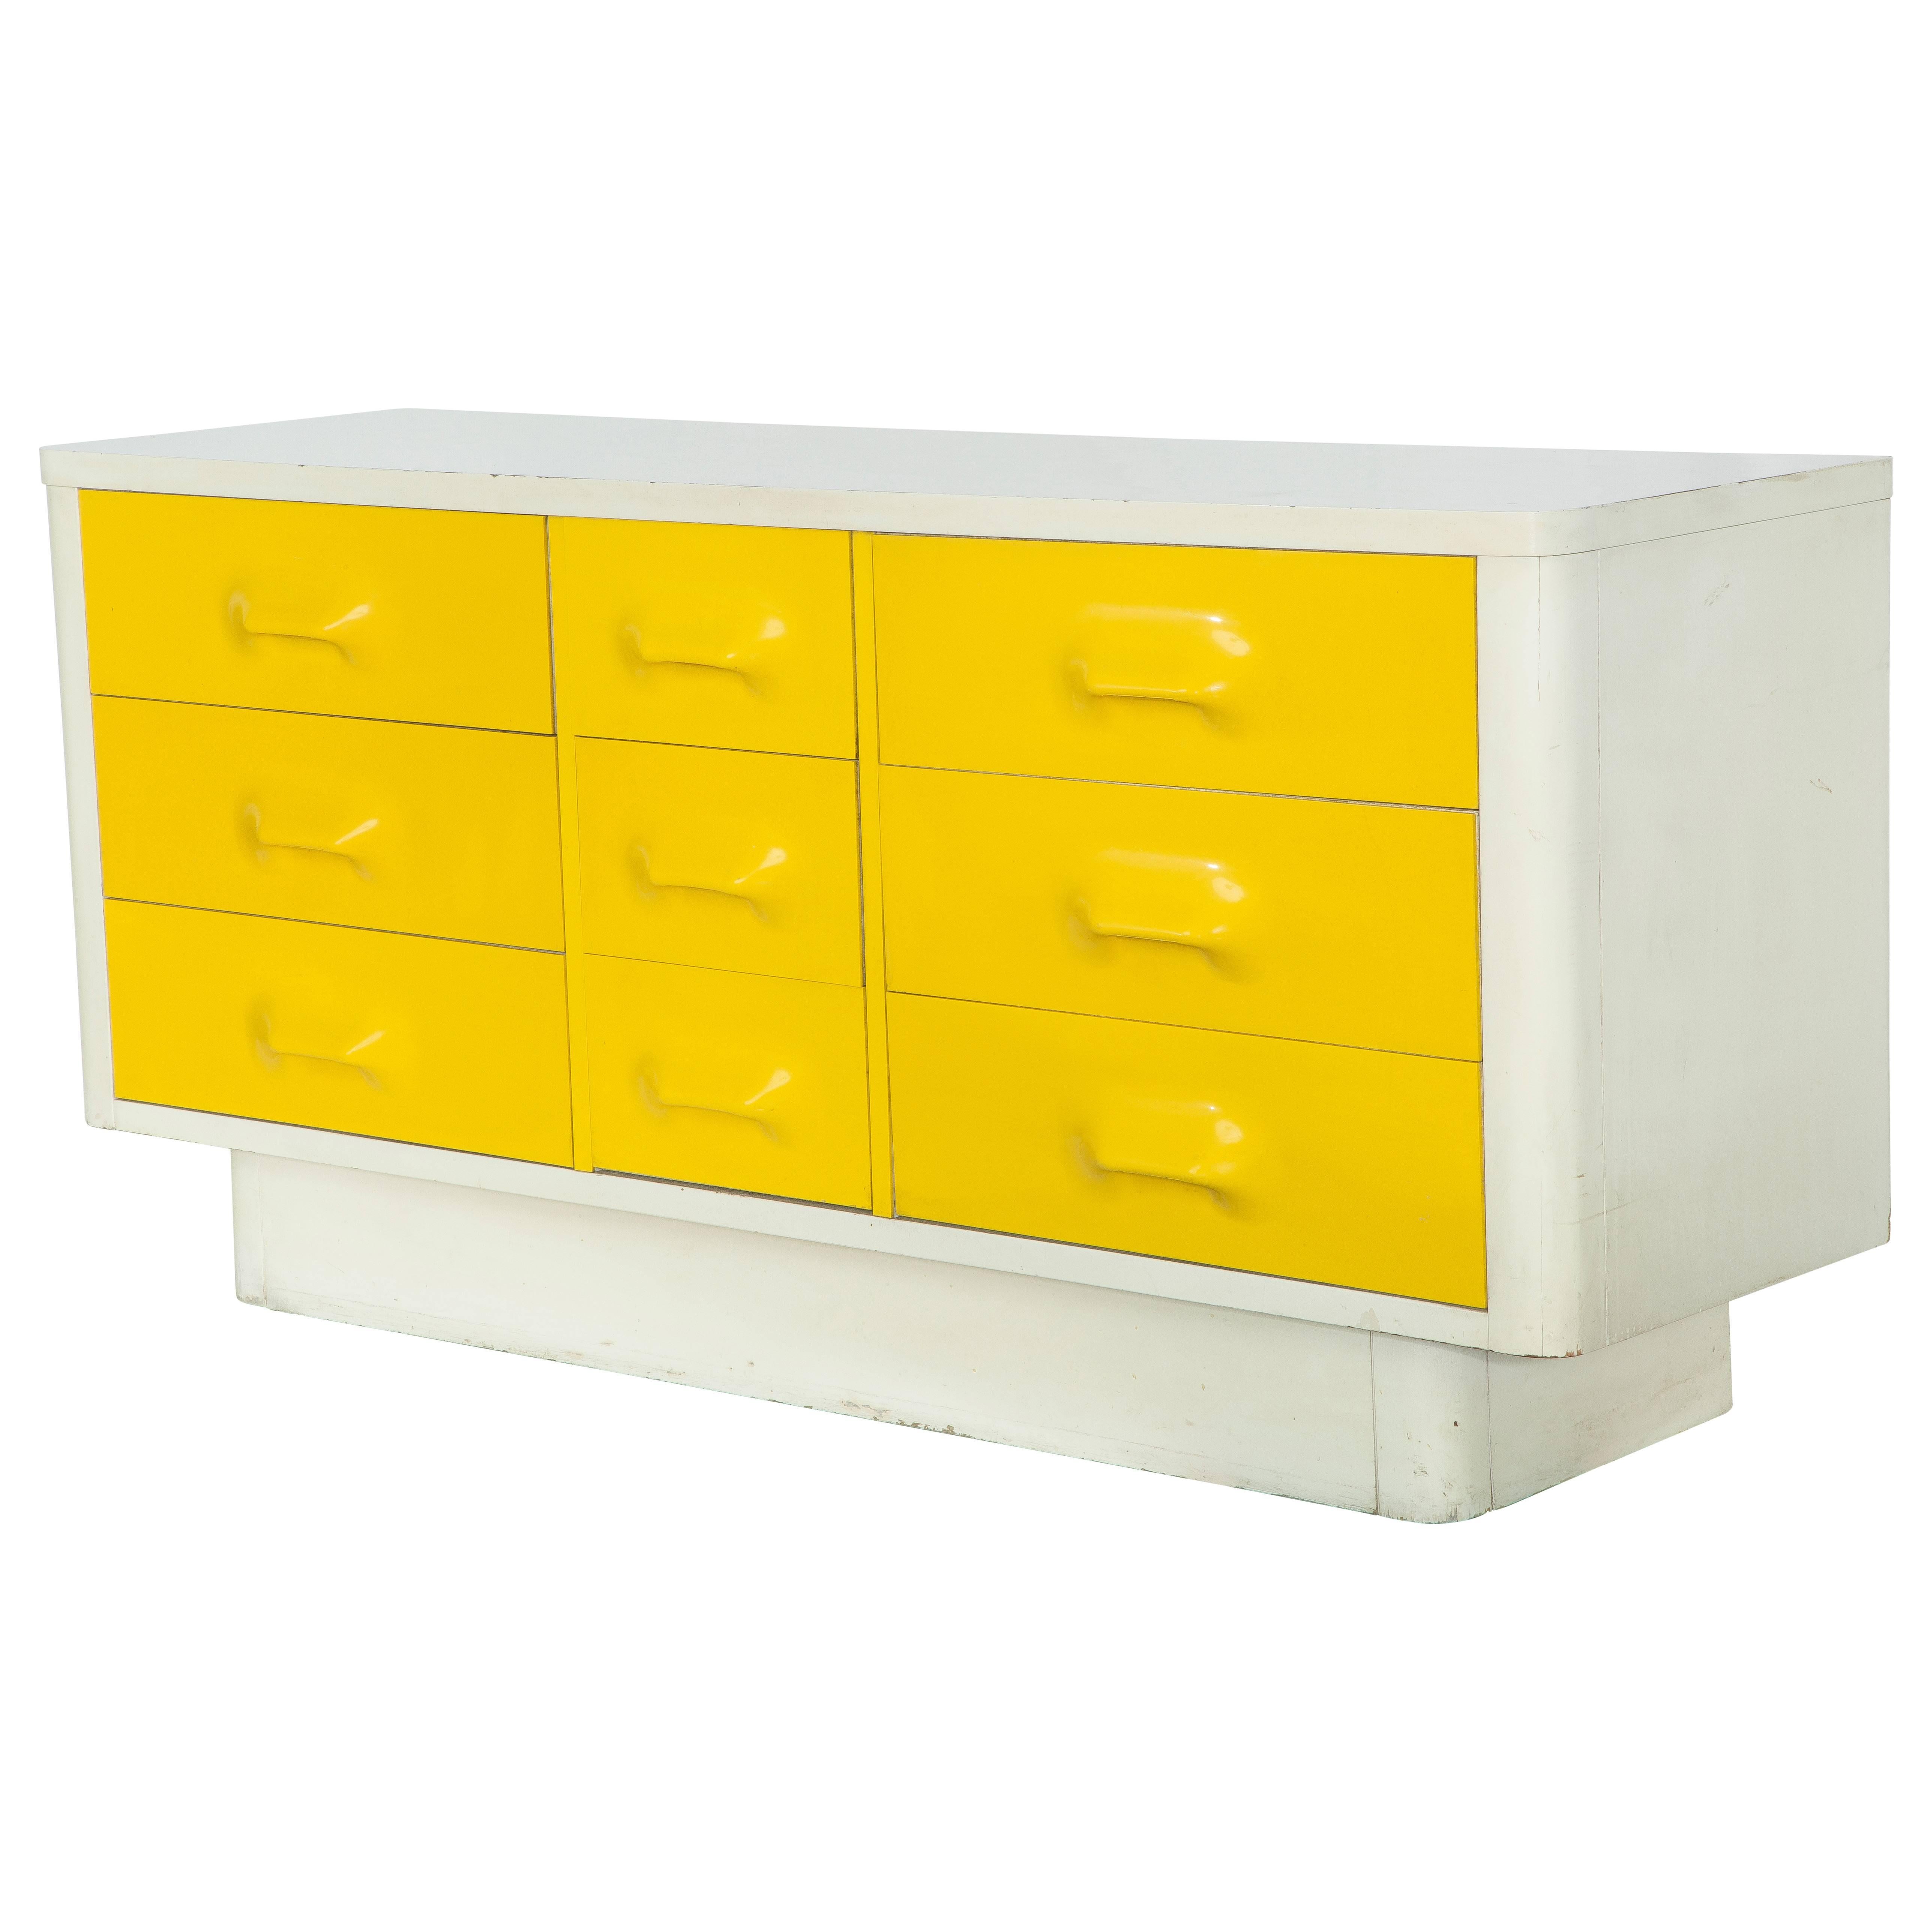 White and yellow Broyhill "Chapter One" dresser in the style of Raymond Loewy Mod-Pop Industrial Design, circa 1970s. The white body of the credenza is white formica laminate, and the vibrant yellow drawers are molded plastic. Nine drawers